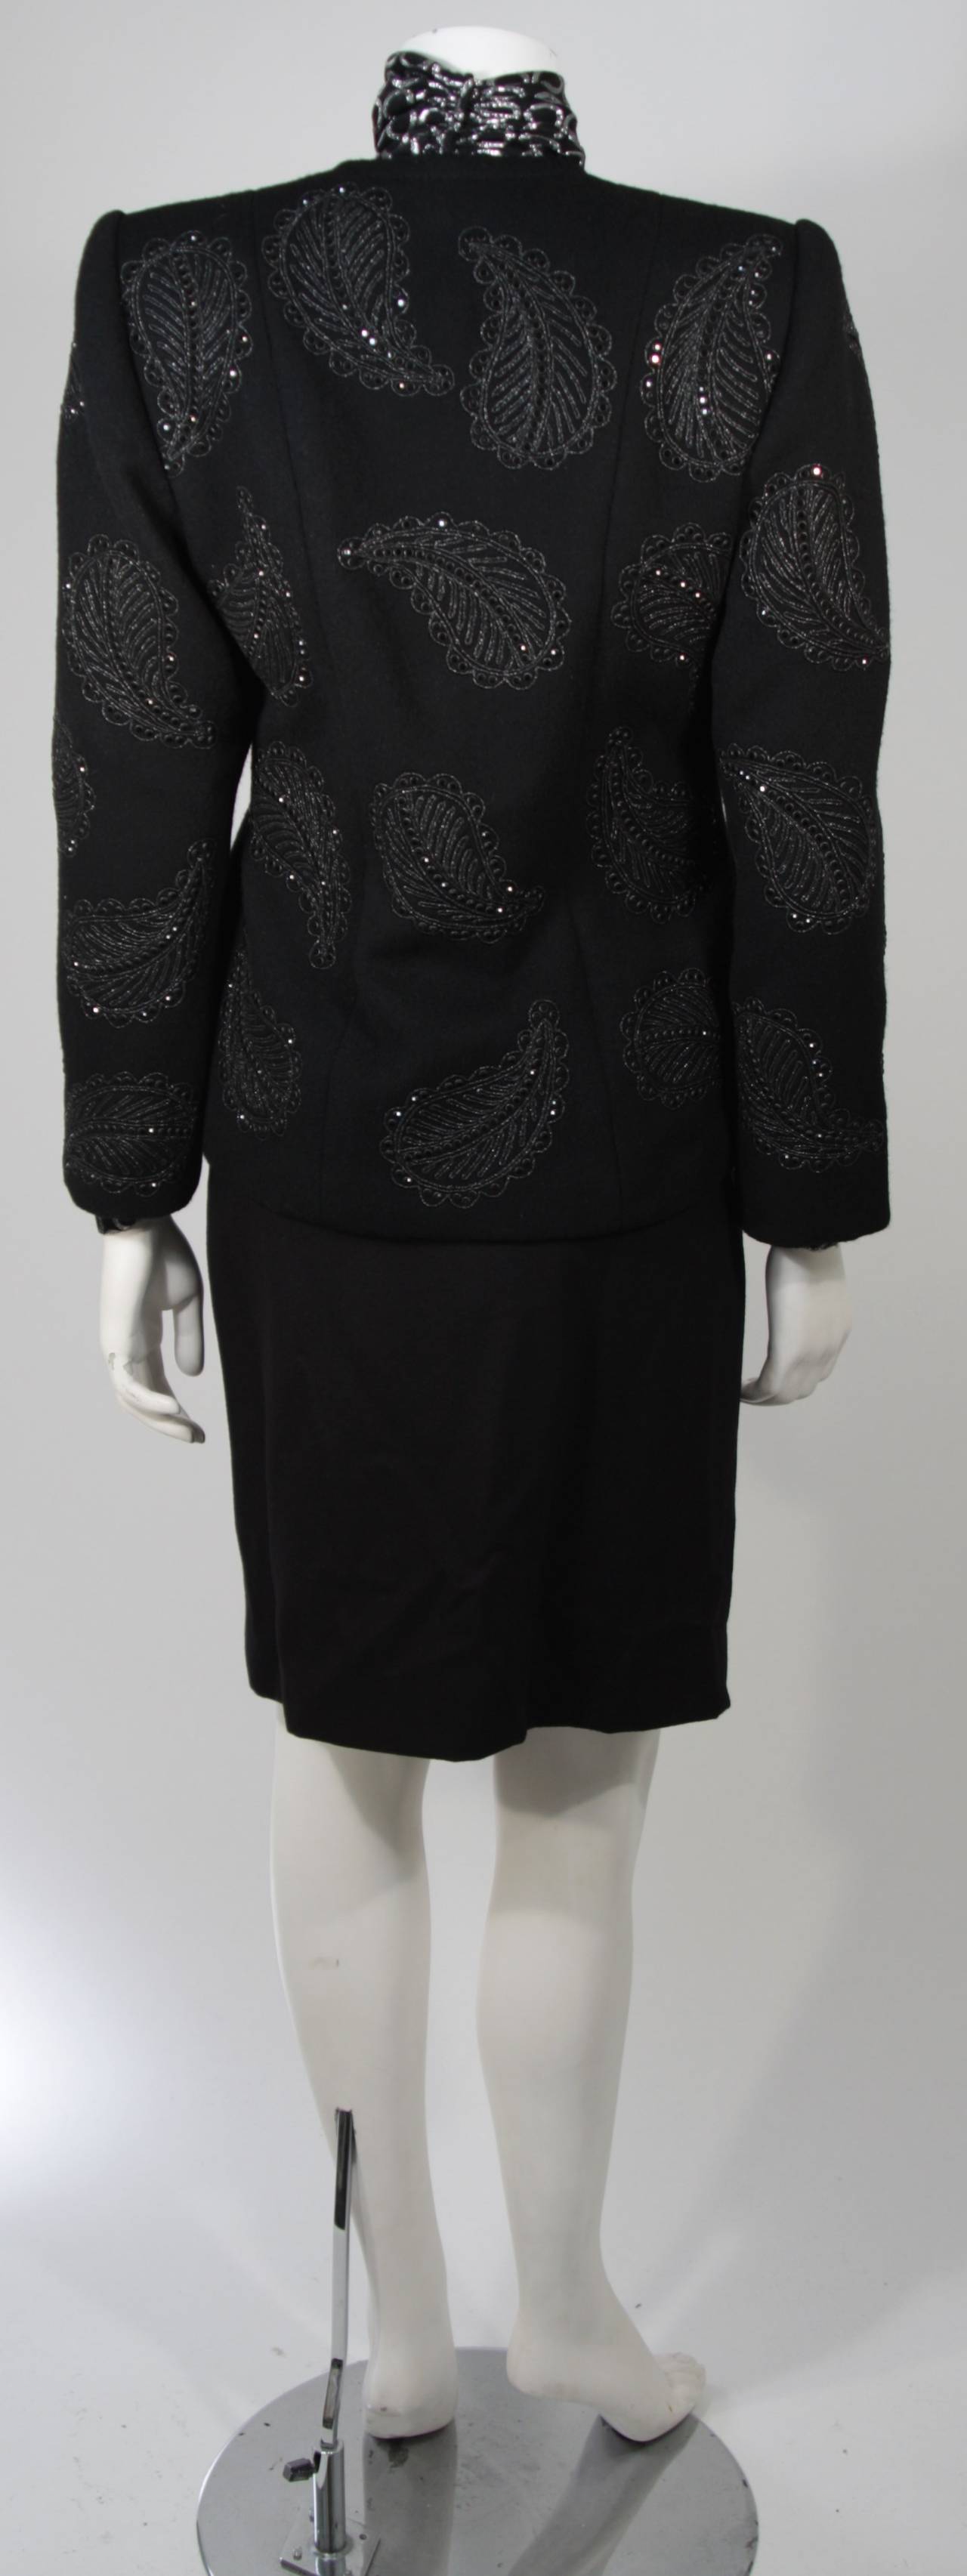 Galanos Black Wool Embroidered Jacket with Silk Metallic Blouse Skirt Size 2-4 3